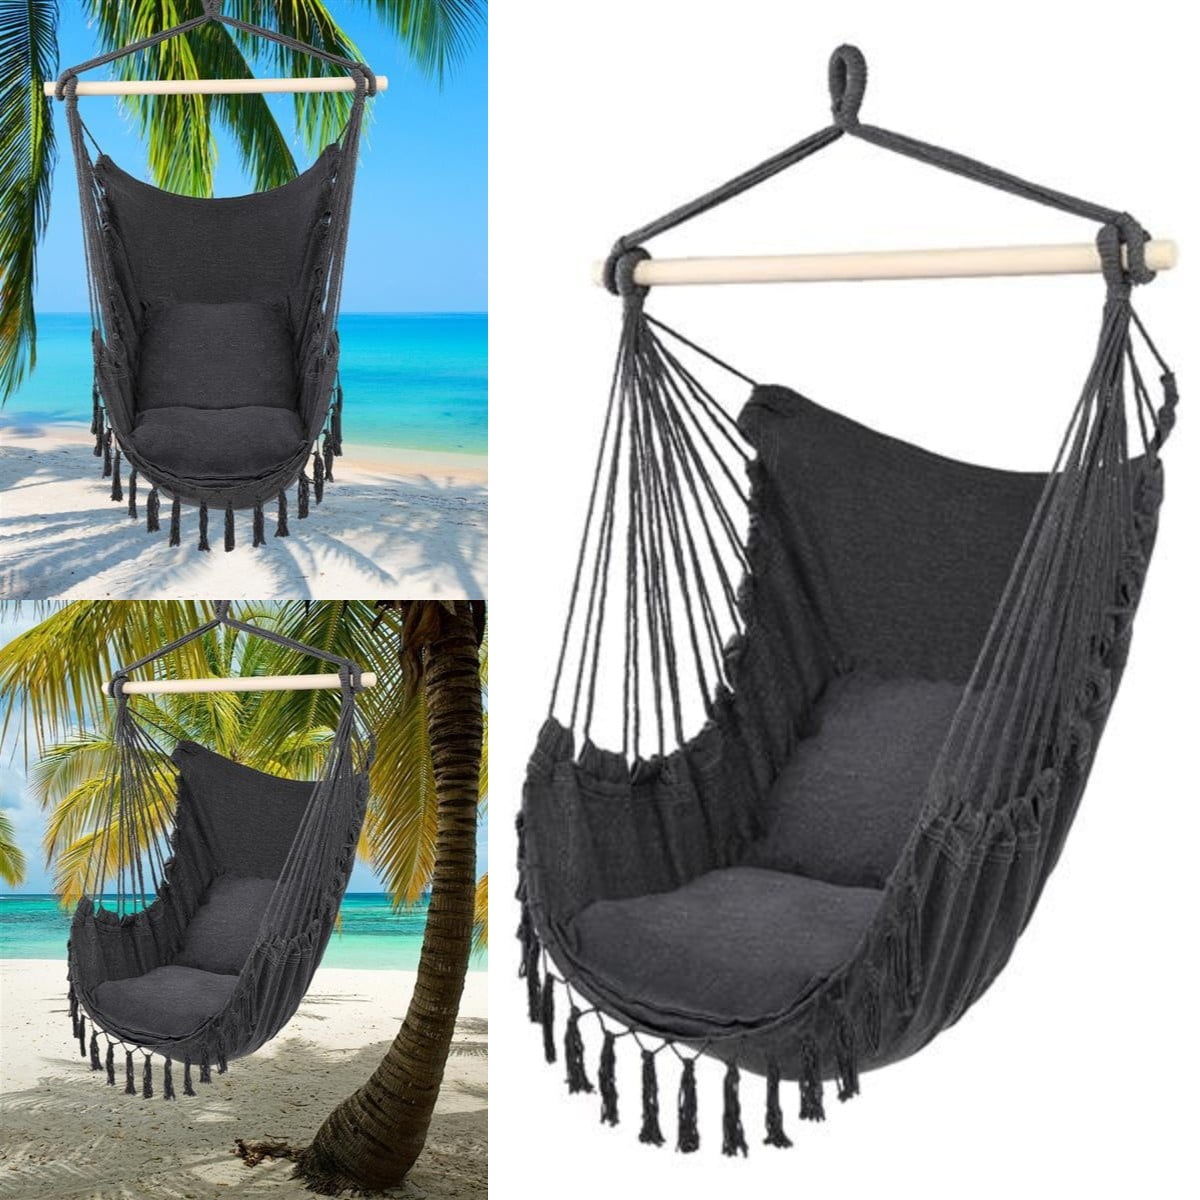 Hammock Cotton Swing Camping Hanging Rope Chair Grey Outdoor Patio With Pillow 